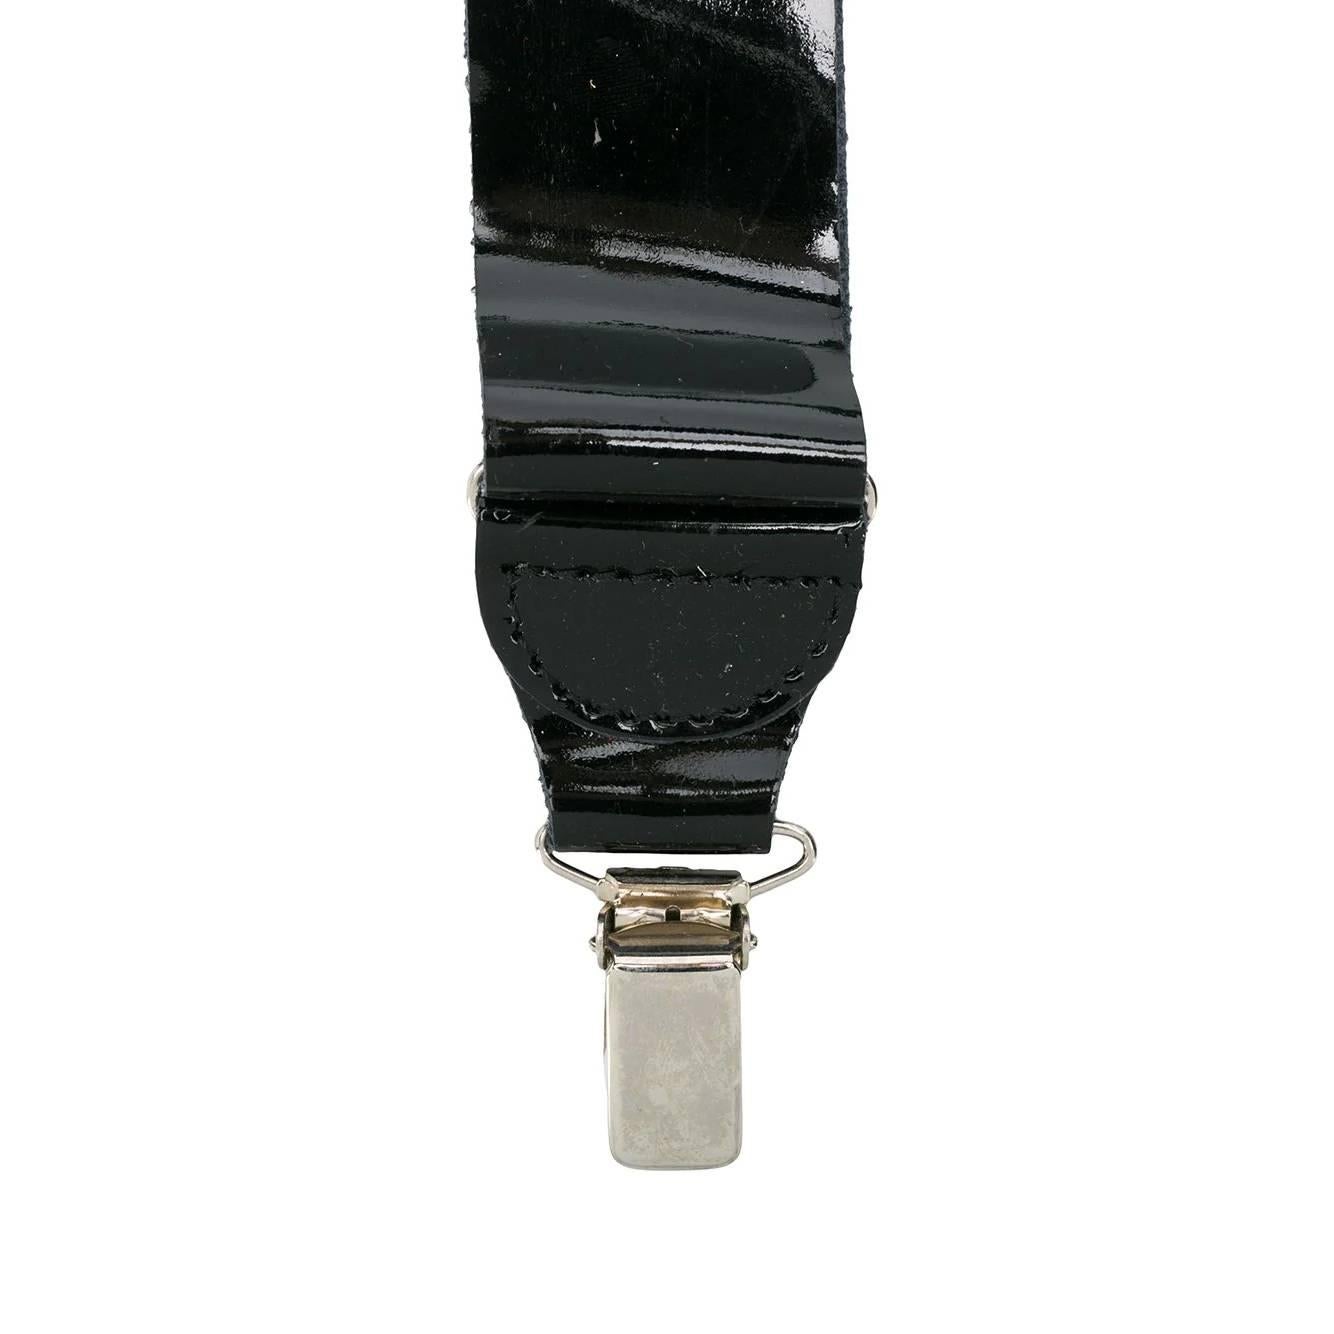 A.N.G.E.L.O. Vintage - ITALY
Gianfranco Ferré black patent leather braces. Silver metal details.

The product has some signs of wear as shown in the pictures.

Years: 90s

One Size